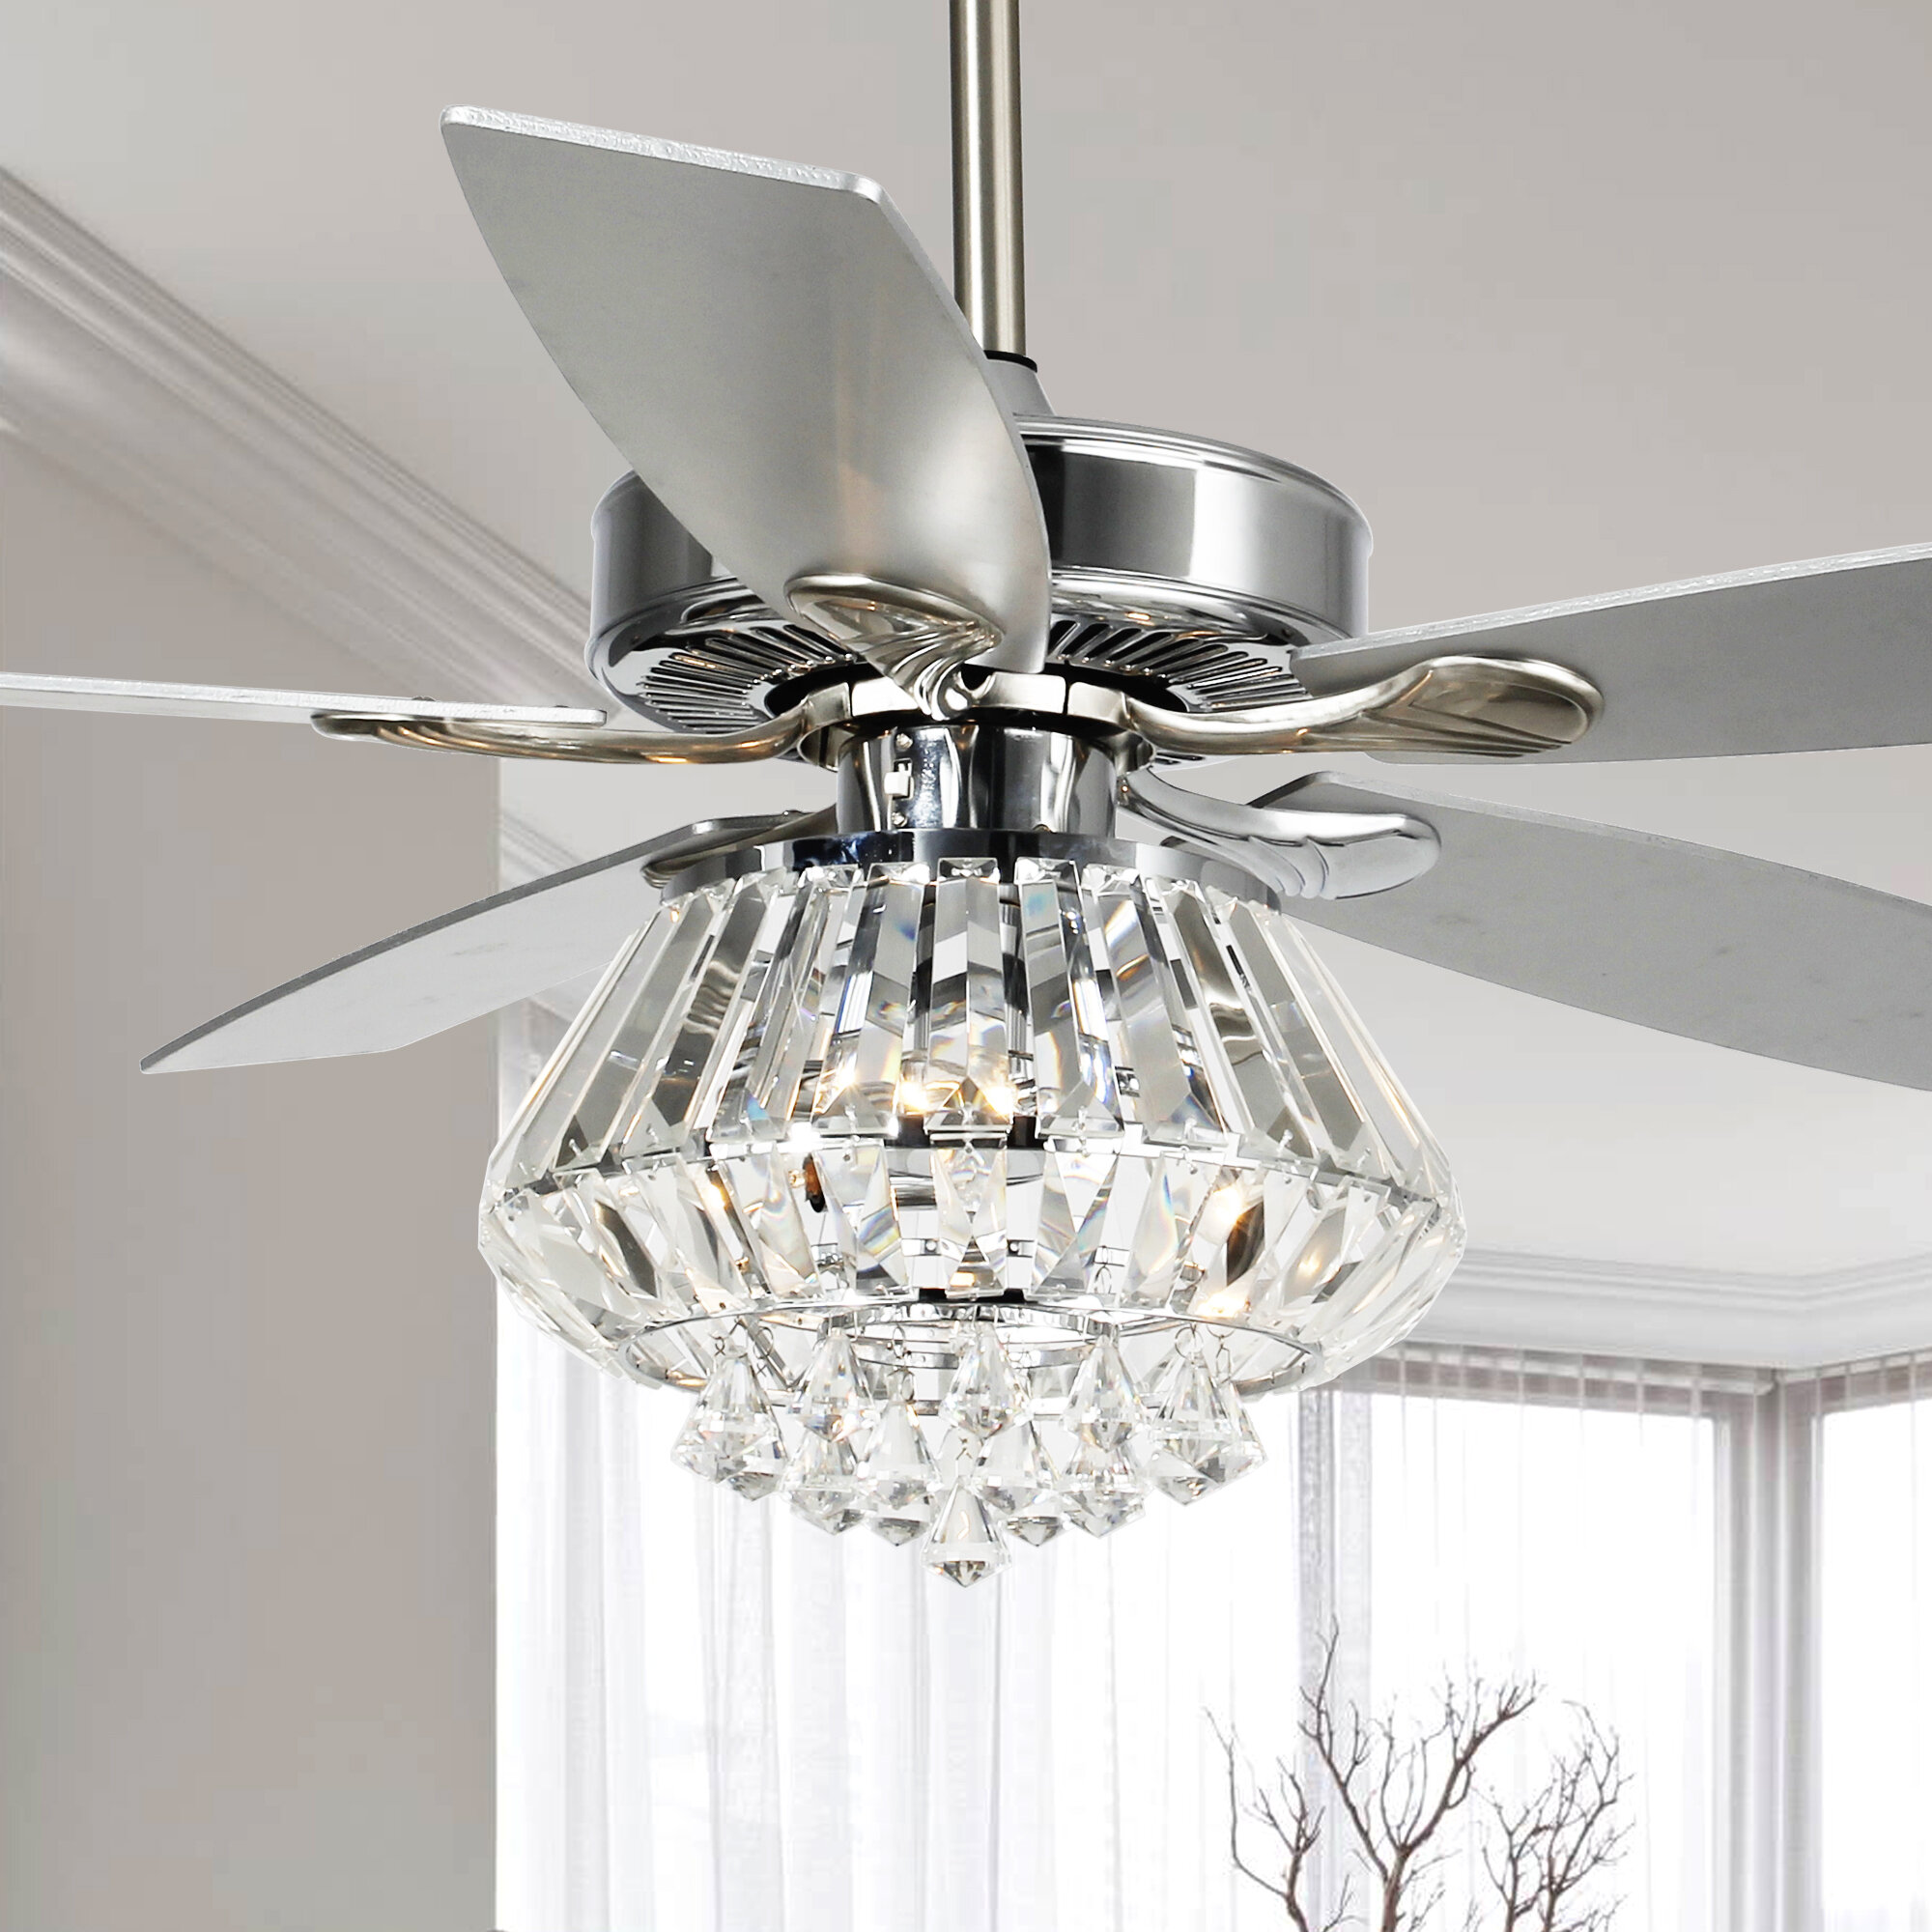 Gold Flamingo 52 Micah 5 Blade Crystal Ceiling Fan With Remote Control And Light Kit Included Reviews Wayfair